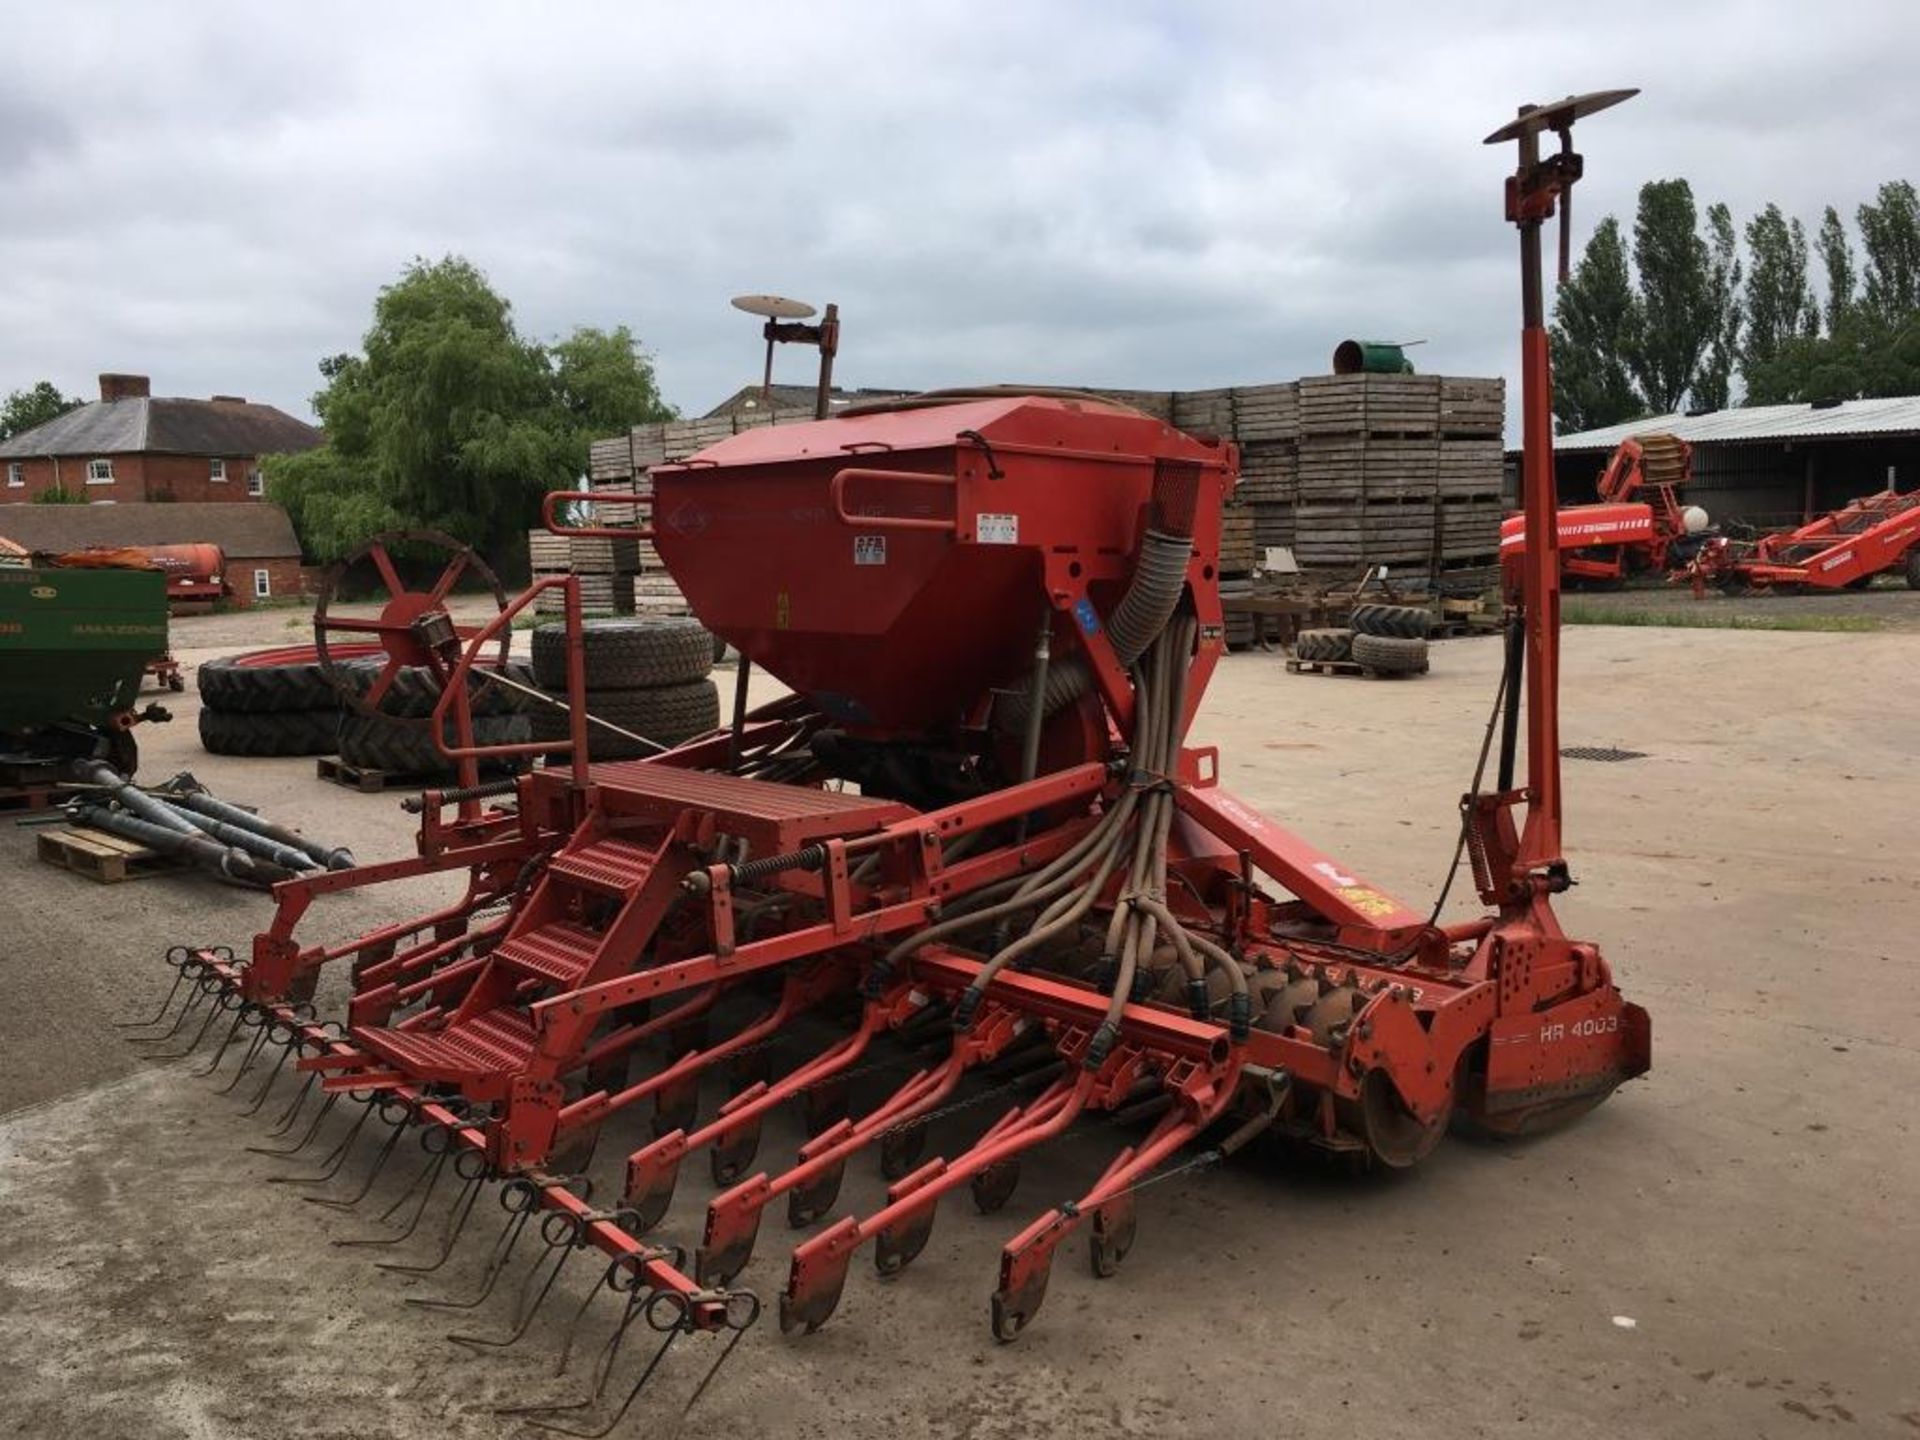 Kuhn HR 4003D 14' power harrow, serial number: A4631 (2002) with Kuhn Venta LC 402 seed drill, - Bild 4 aus 15